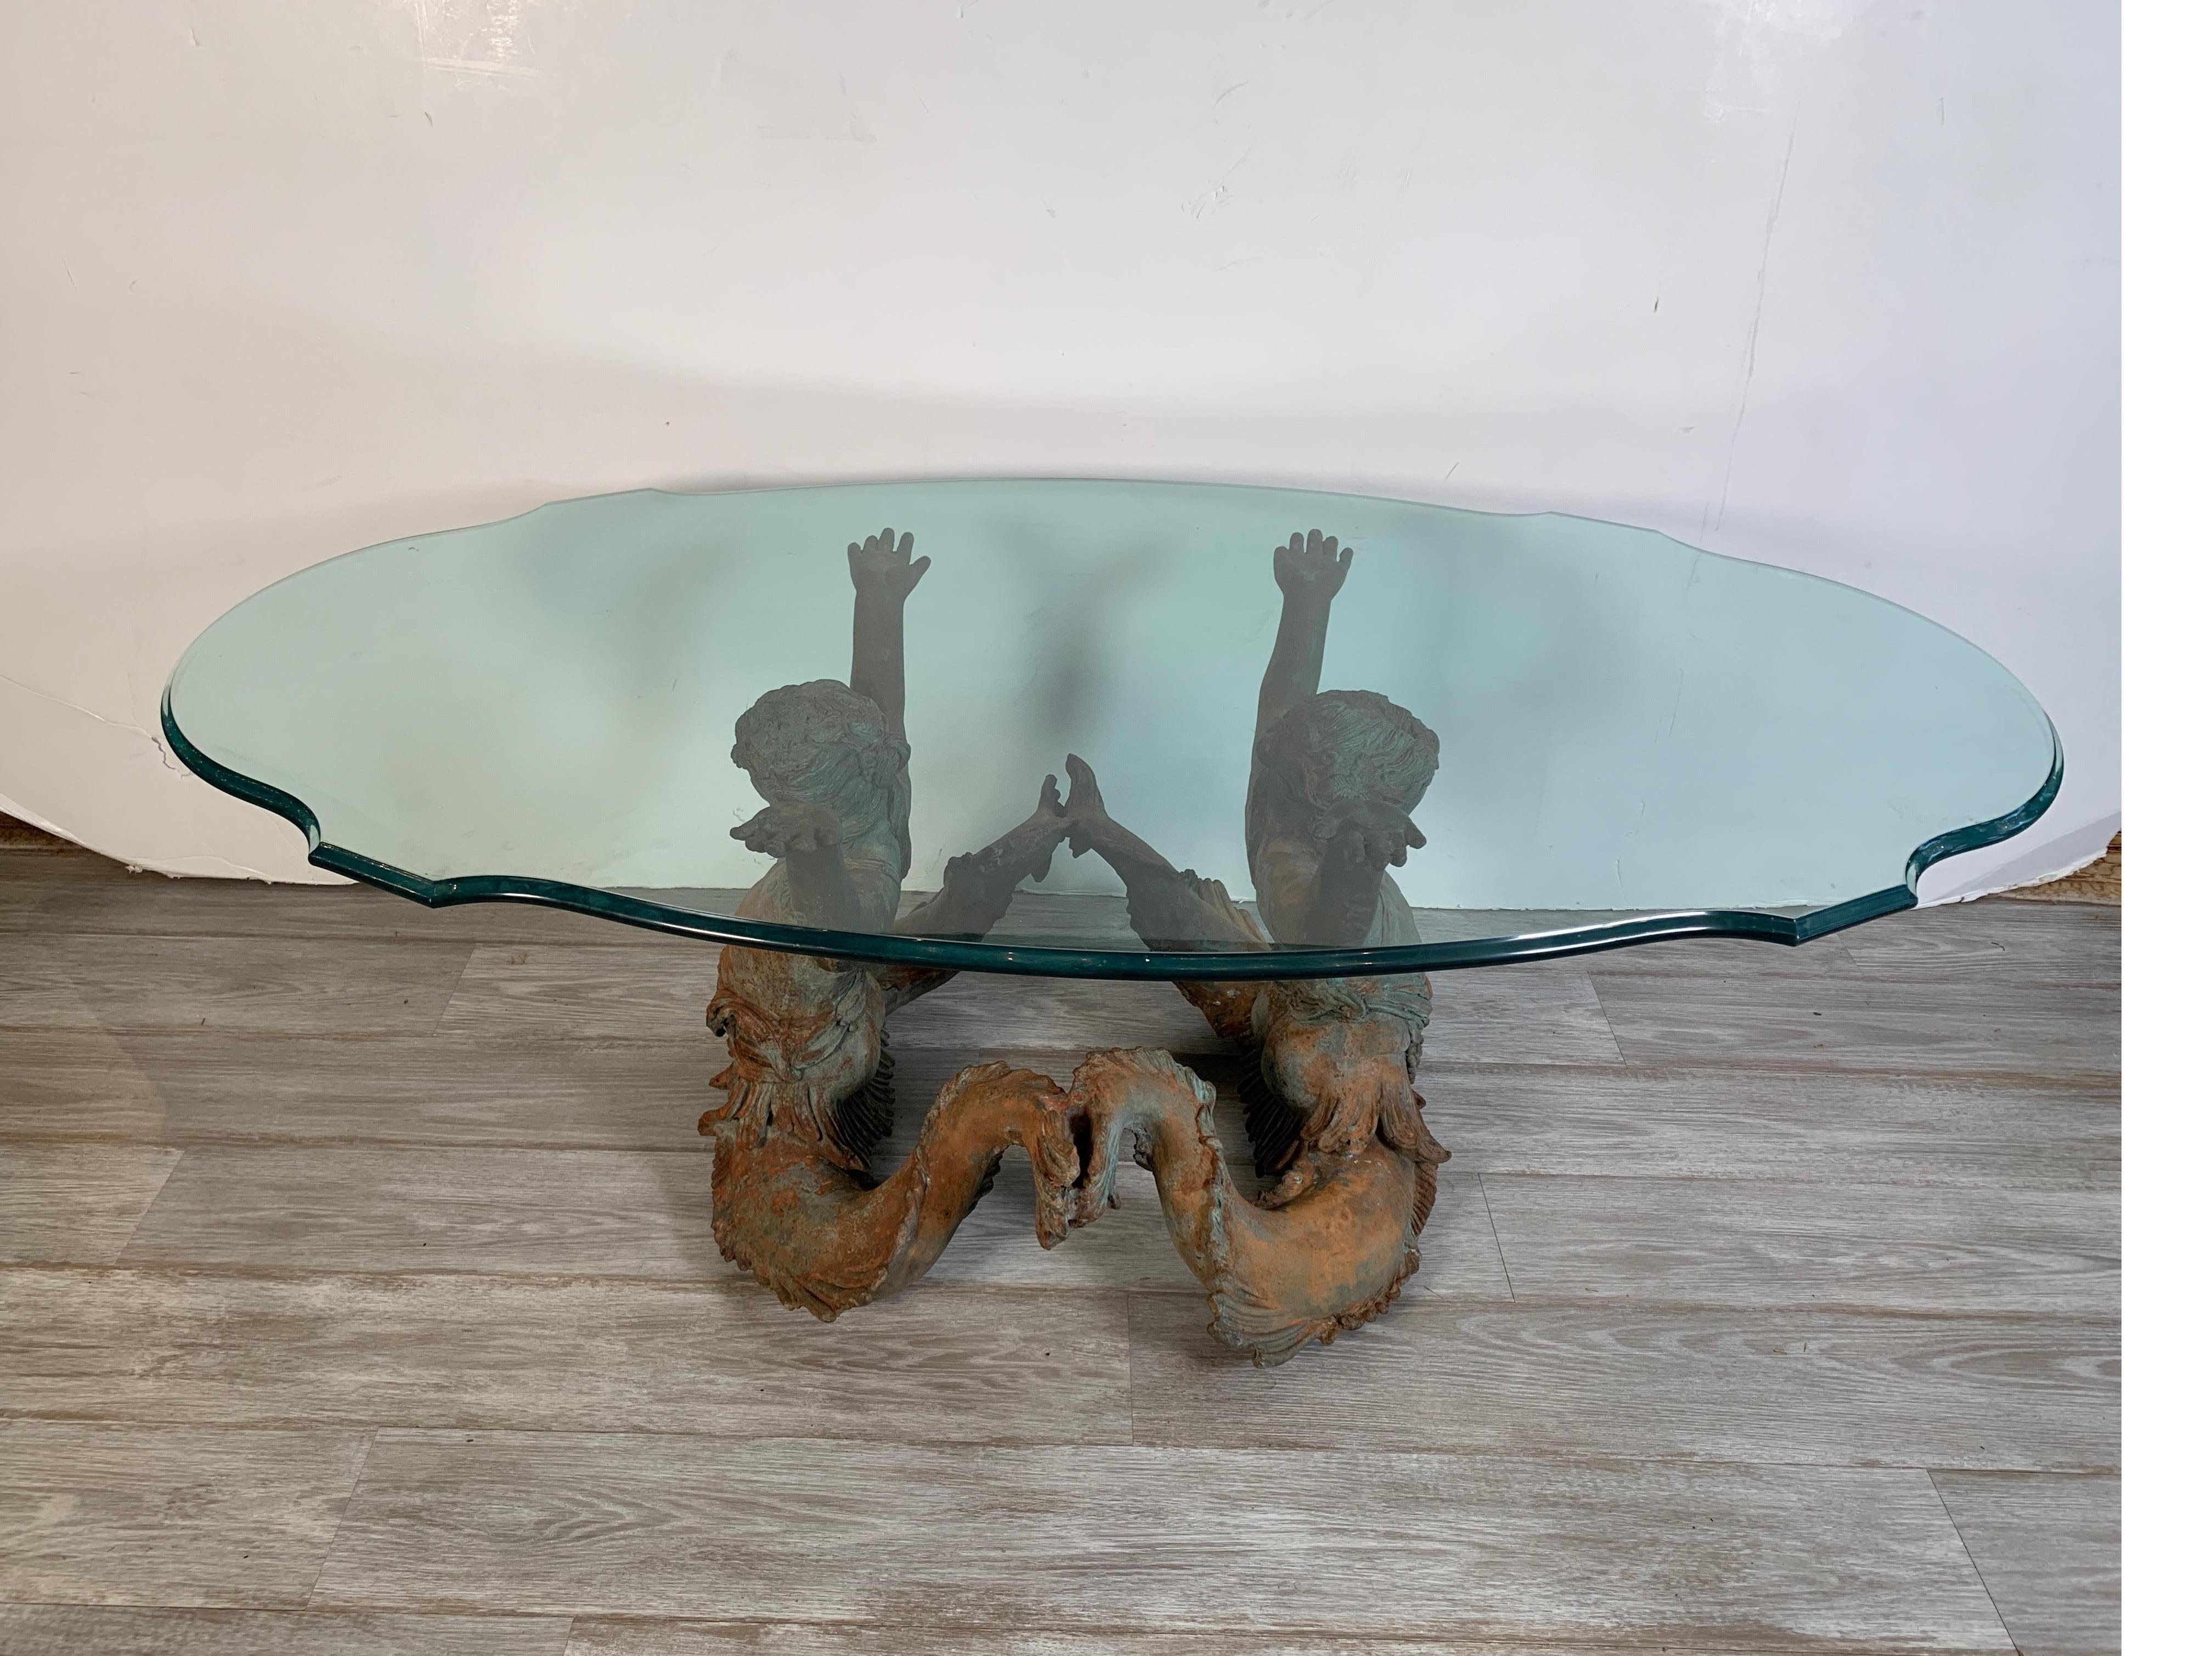 Finely cast bronze figural coffee table base with a beveled glass top. The base consists of two jovial figures of sea nymphs, finely detailed with an intentional weathered finish.

Tabletop dimensions: 30